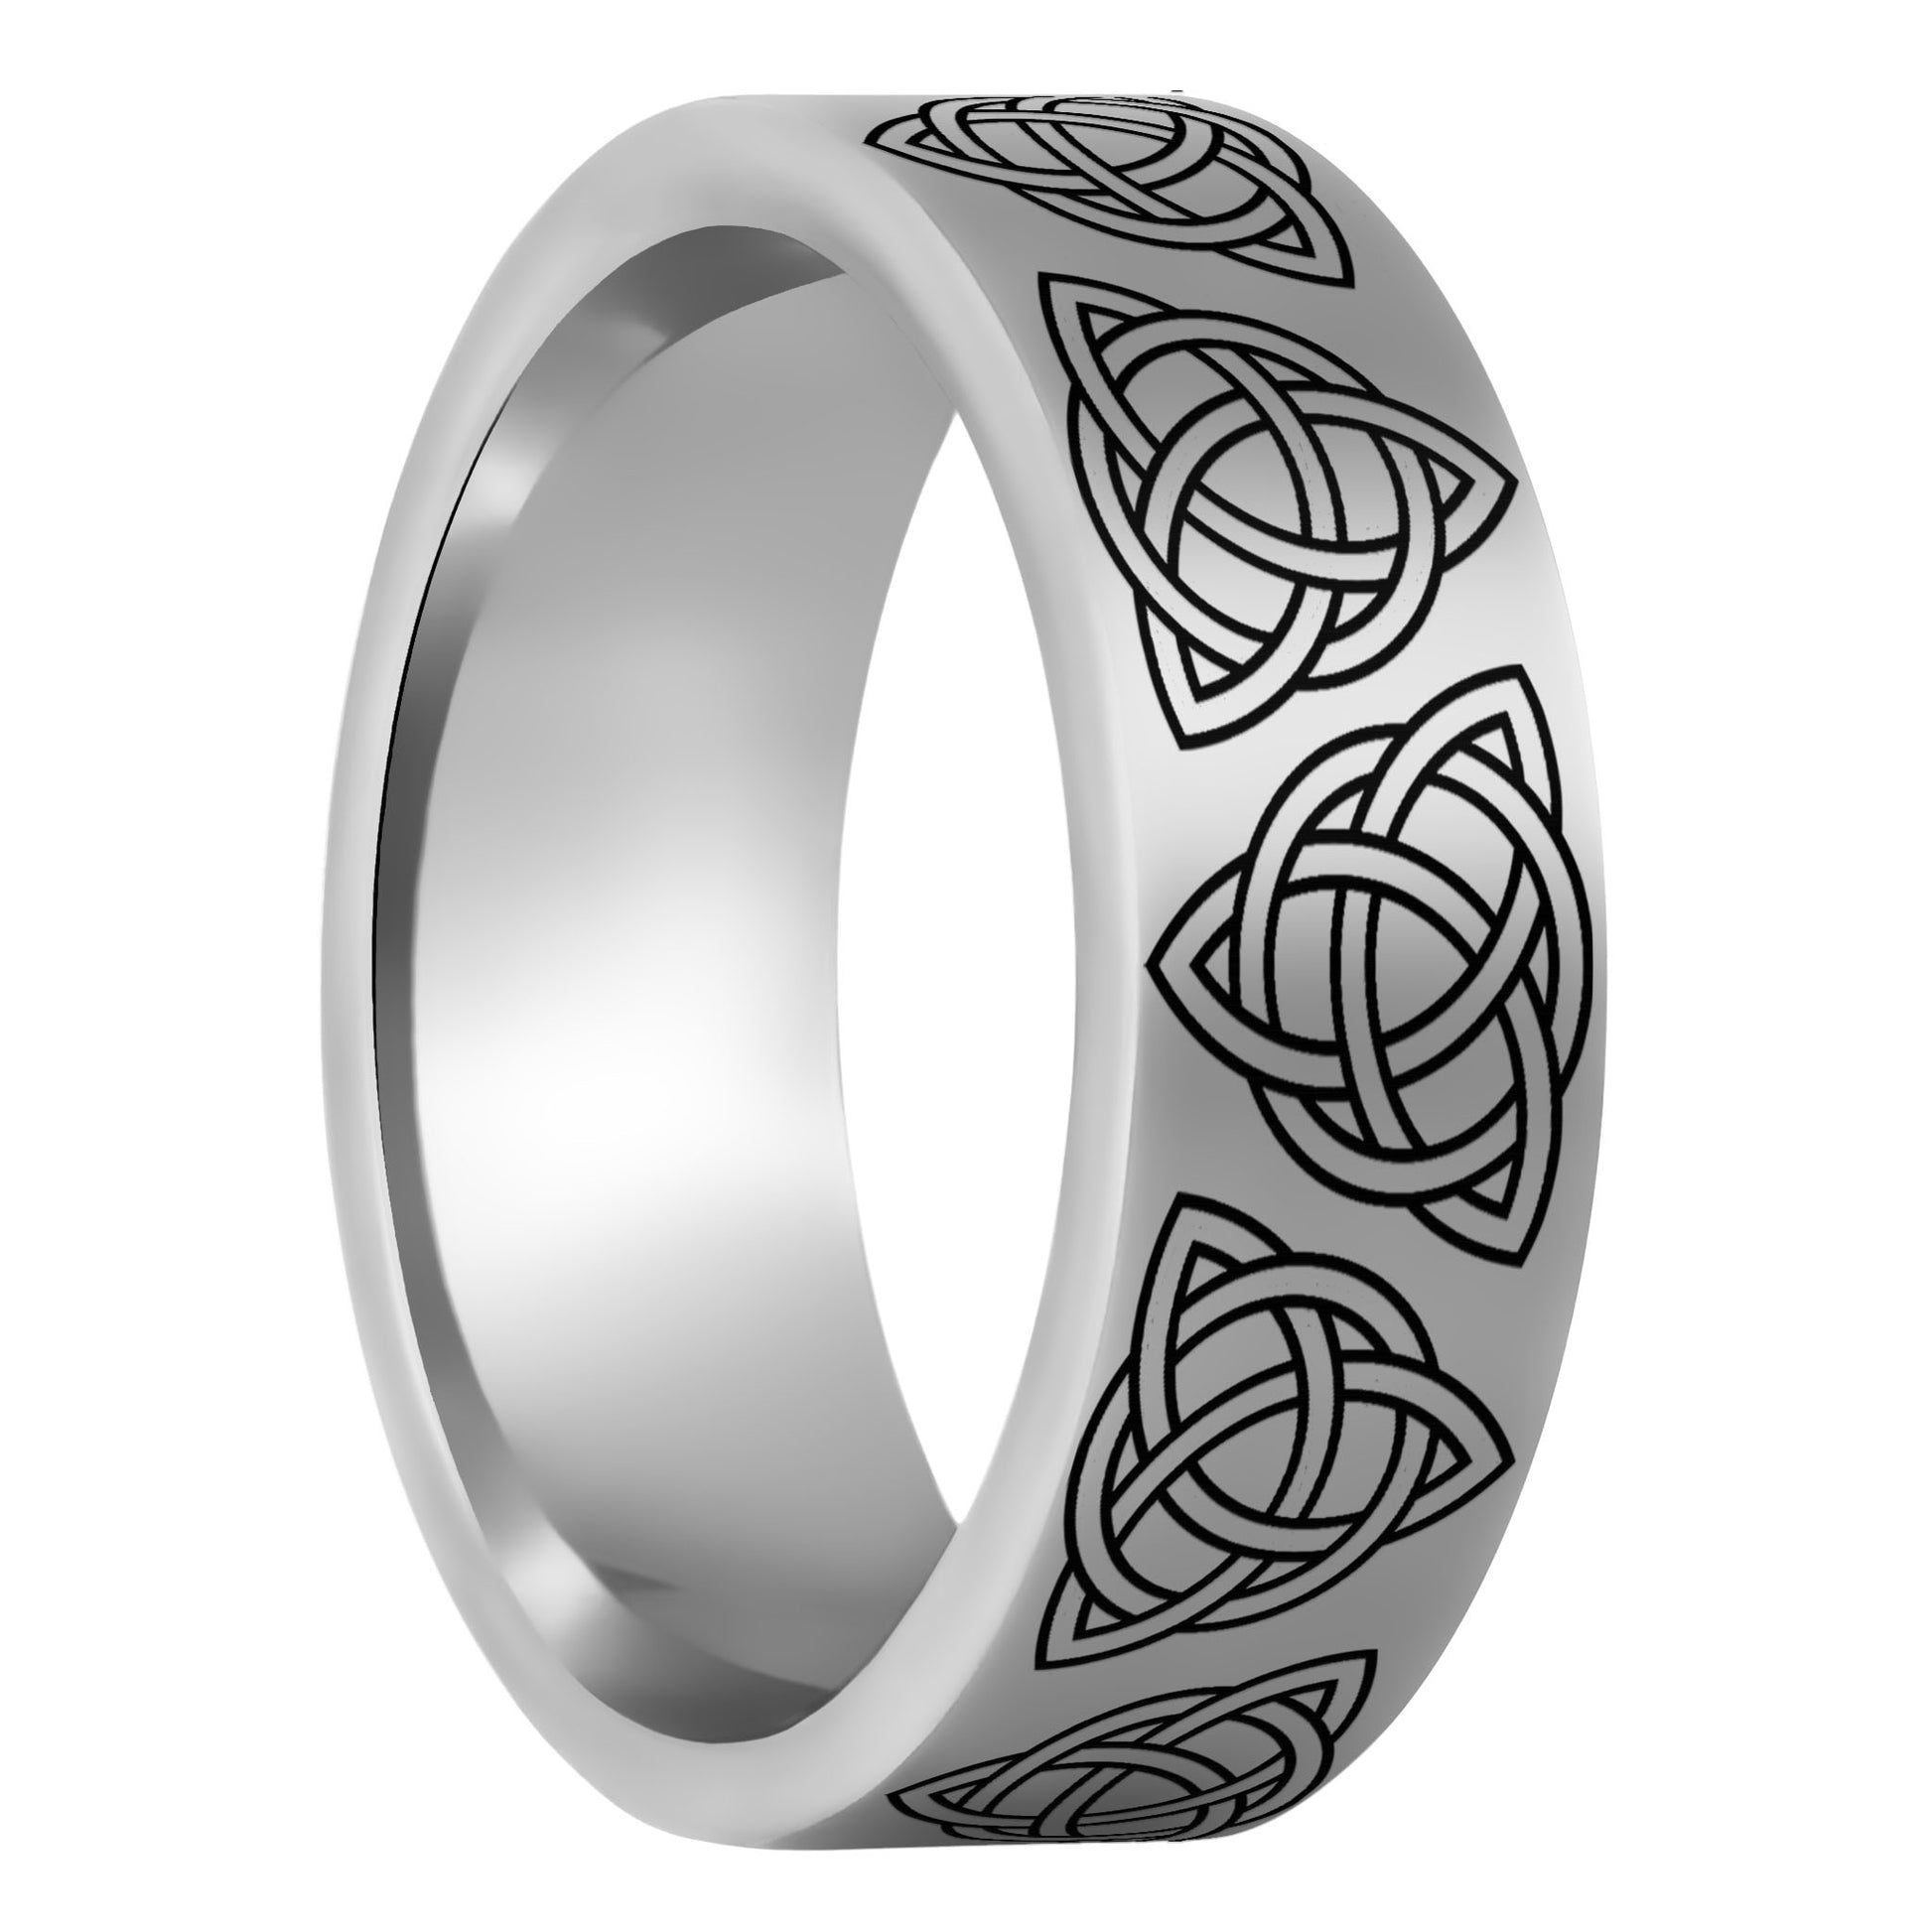 One Celtic Trinity Knot Tungsten Men's Wedding Band displayed on a plain white background